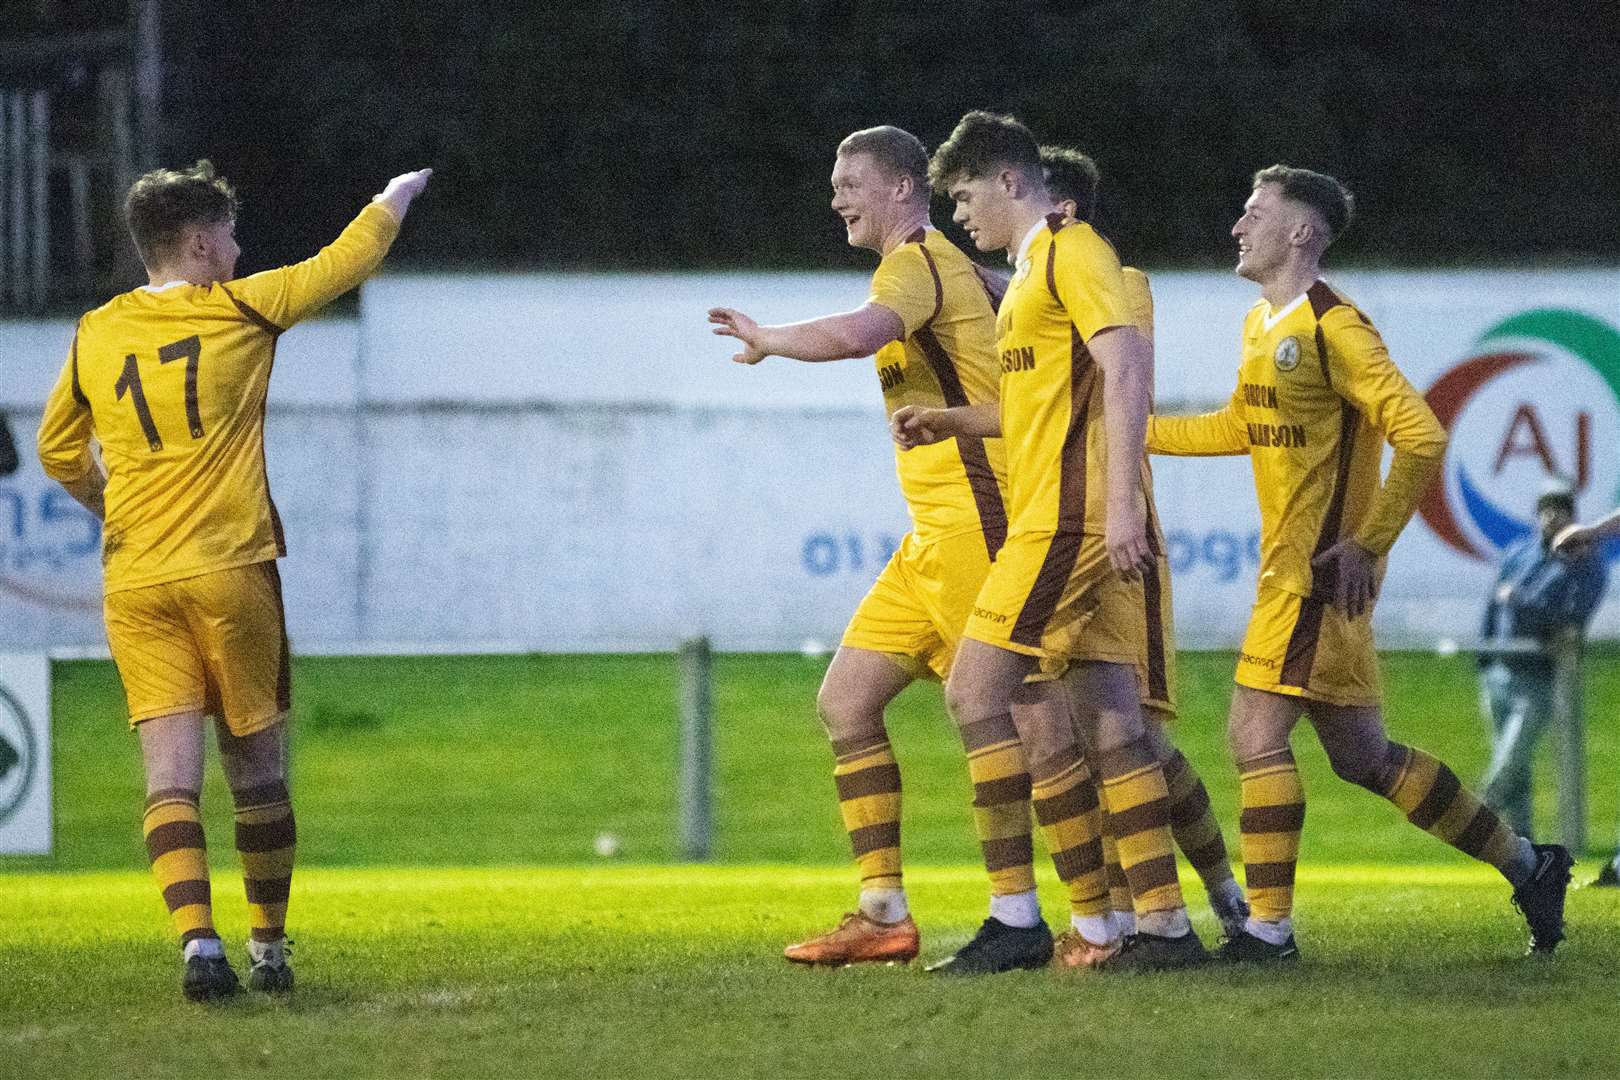 Forres Mechanics' Lee Fraser celebrates his second and Forres' sixth goal of the afternoon...Forres Mechanics FC (8) vs Strathspey Thistle FC (1) - Highland Football League 22/23 - Mosset Park, Forres 07/01/23...Picture: Daniel Forsyth..